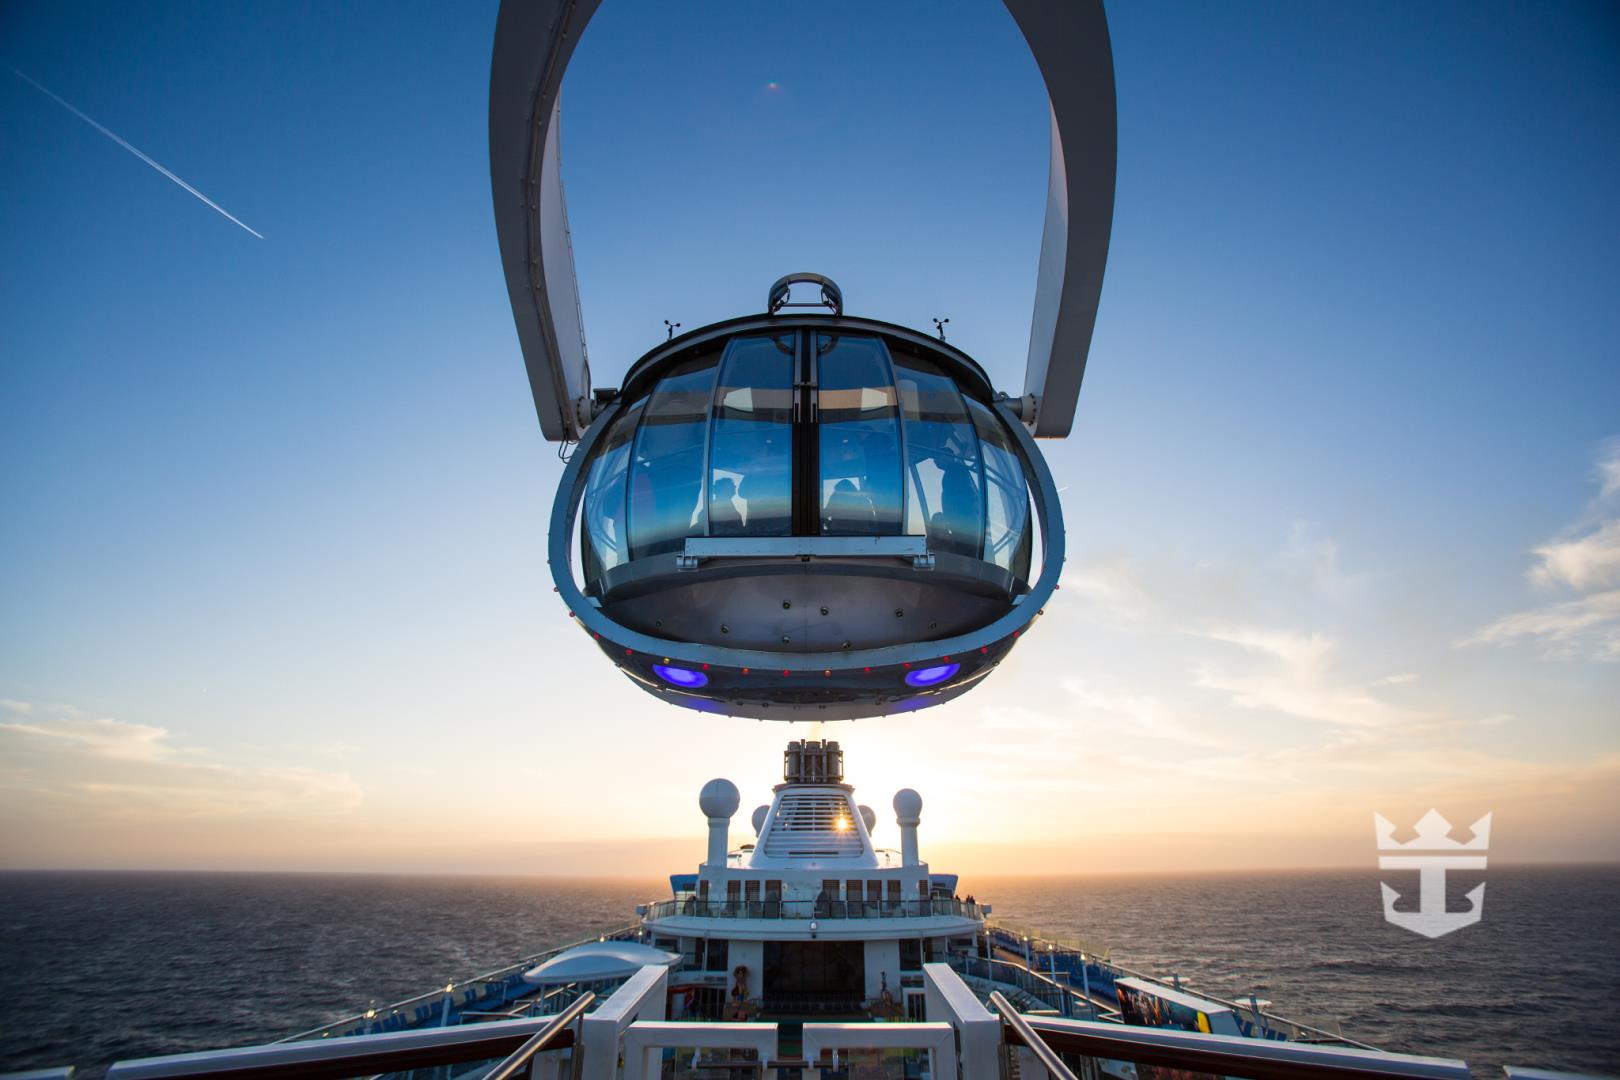 View of passengers on NorthStar in mid-ascent at dusk